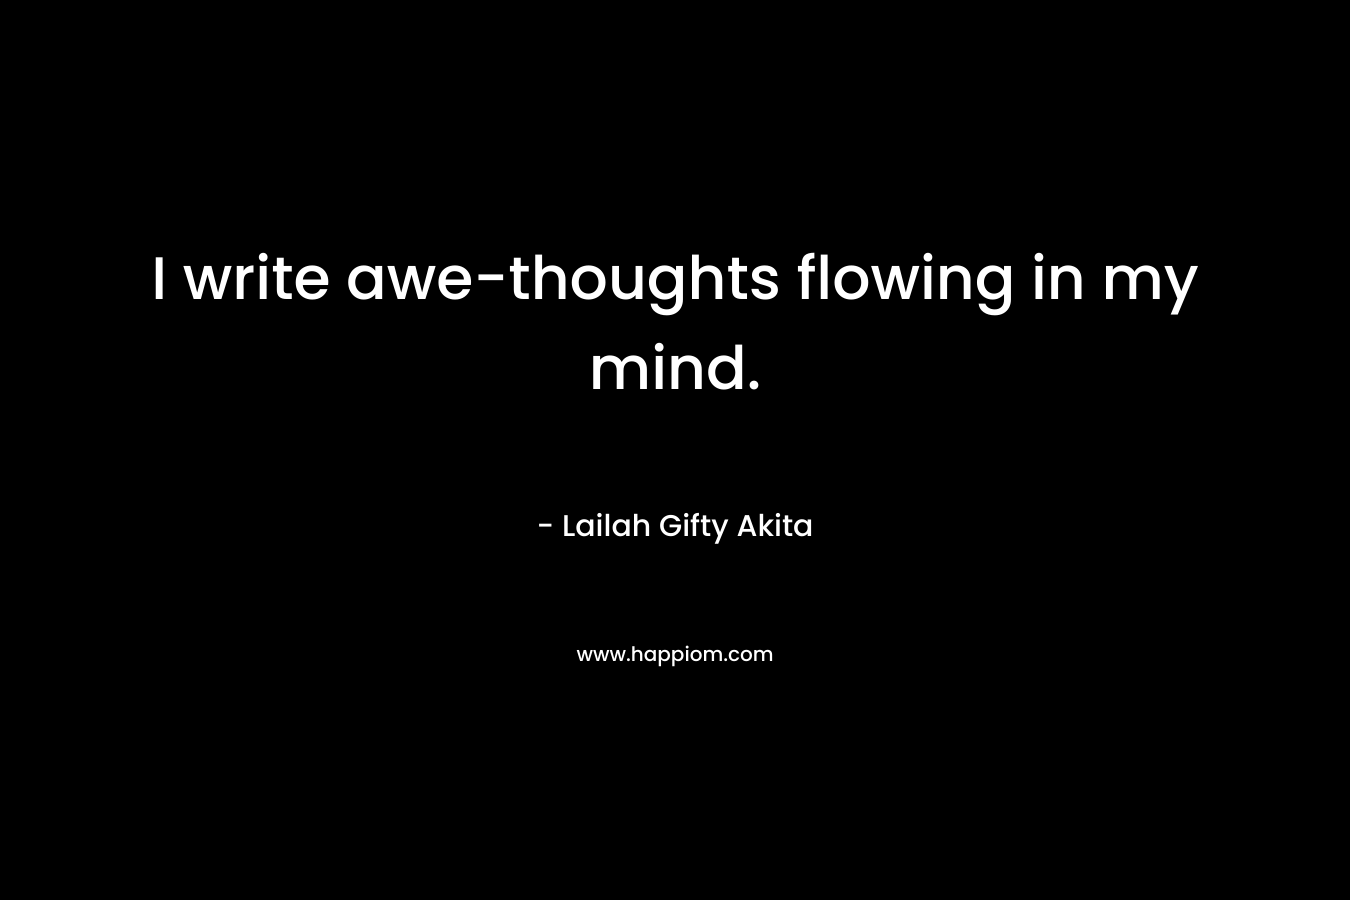 I write awe-thoughts flowing in my mind. – Lailah Gifty Akita